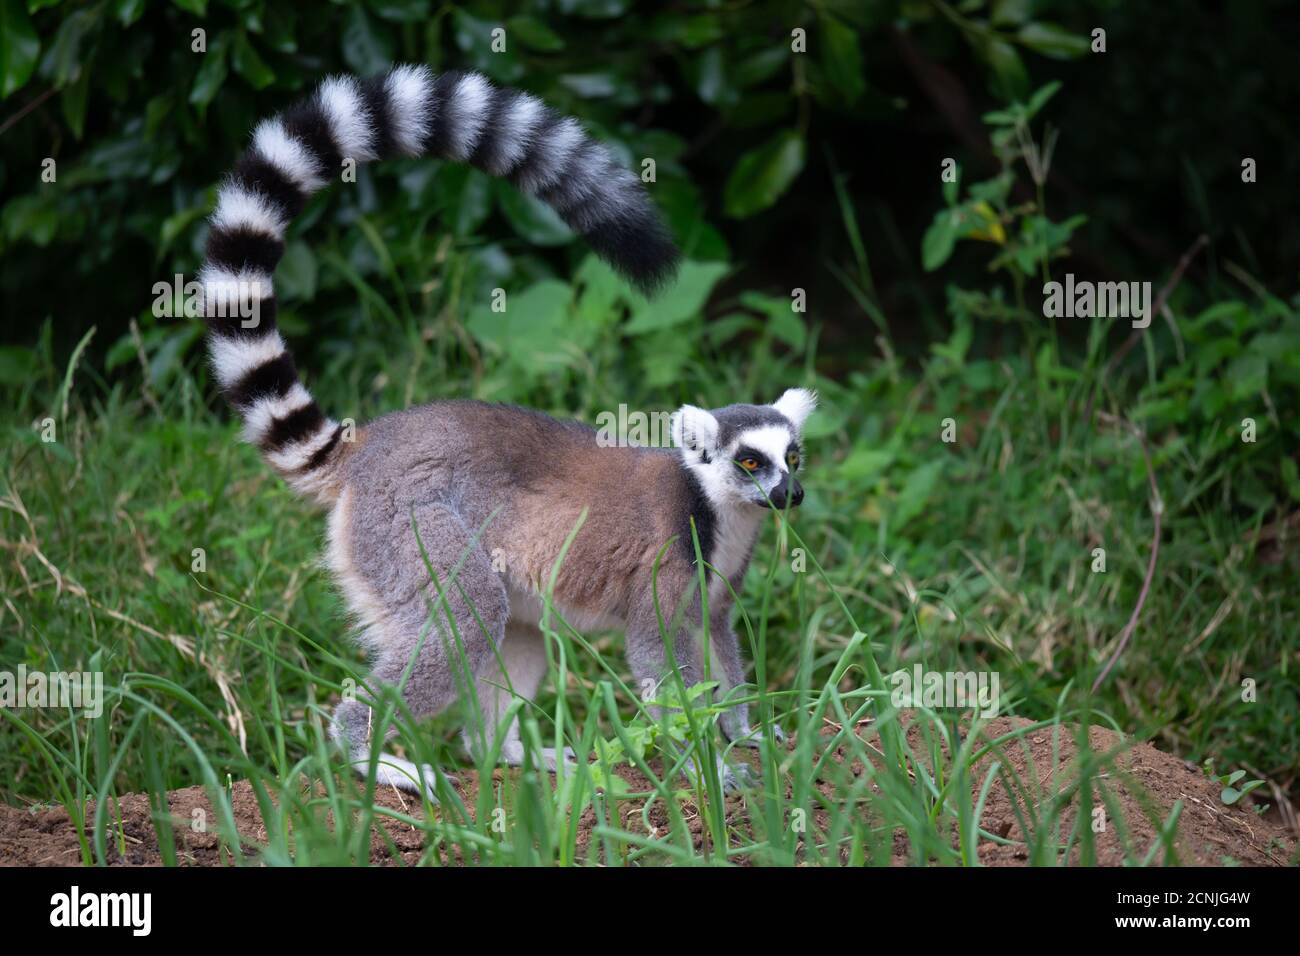 A ring-tailed lemur in its natural environment Stock Photo